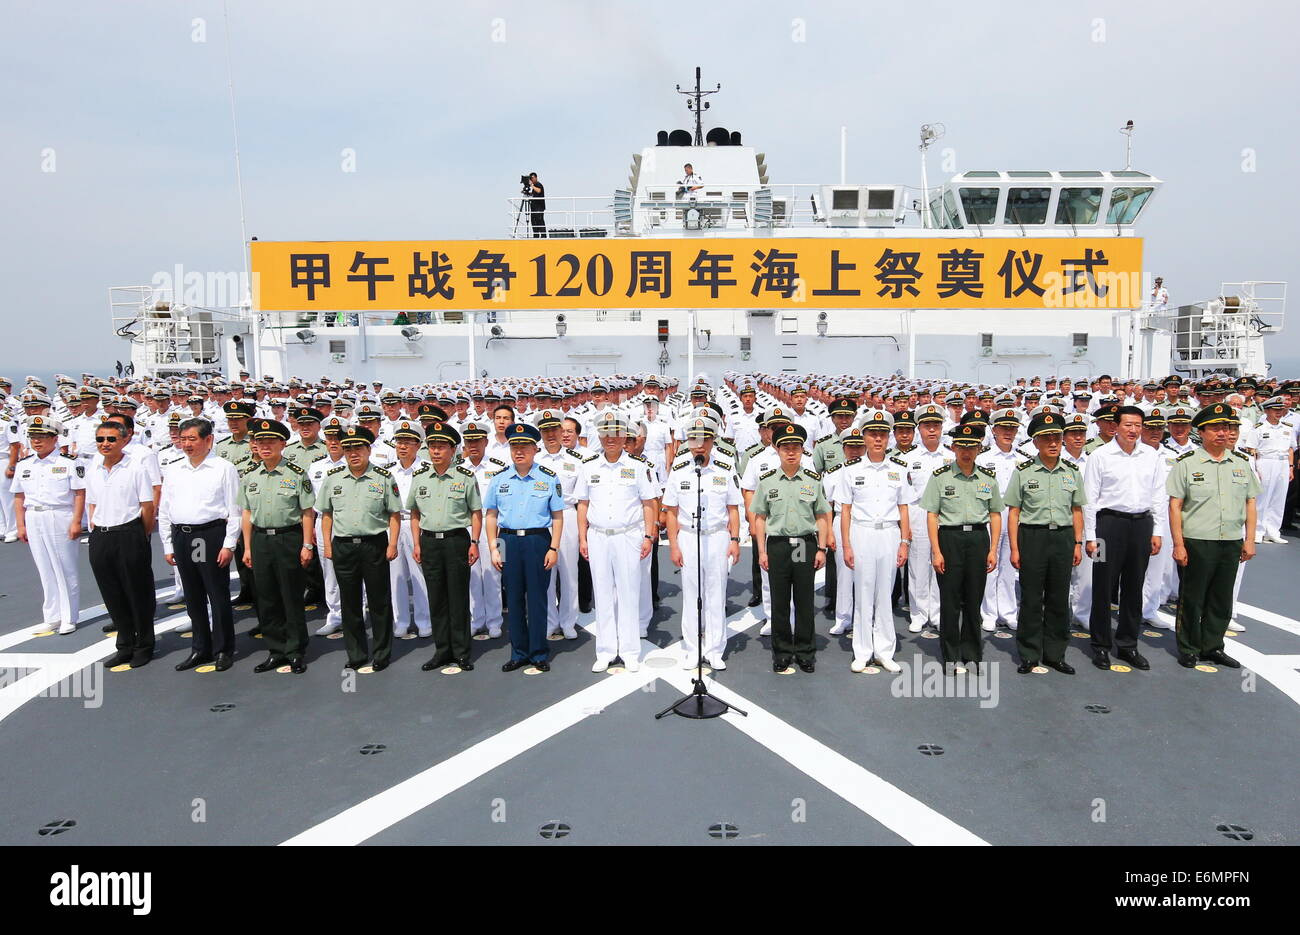 Weihai, China's Shandong Province. 27th Aug, 2014. A memorial ceremony is held to commemorate the 120th anniversary of the First Sino-Japanese War of 1894-1895 on a ship in a port of Weihai, east China's Shandong Province, Aug. 27, 2014. The People's Liberation Army (PLA) Navy on Wednesday held a memorial ceremony for the First Sino-Japanese War of 1894-1895, also known as the Jiawu War, in a Weihai port. Credit:  Zha Chunming/Xinhua/Alamy Live News Stock Photo